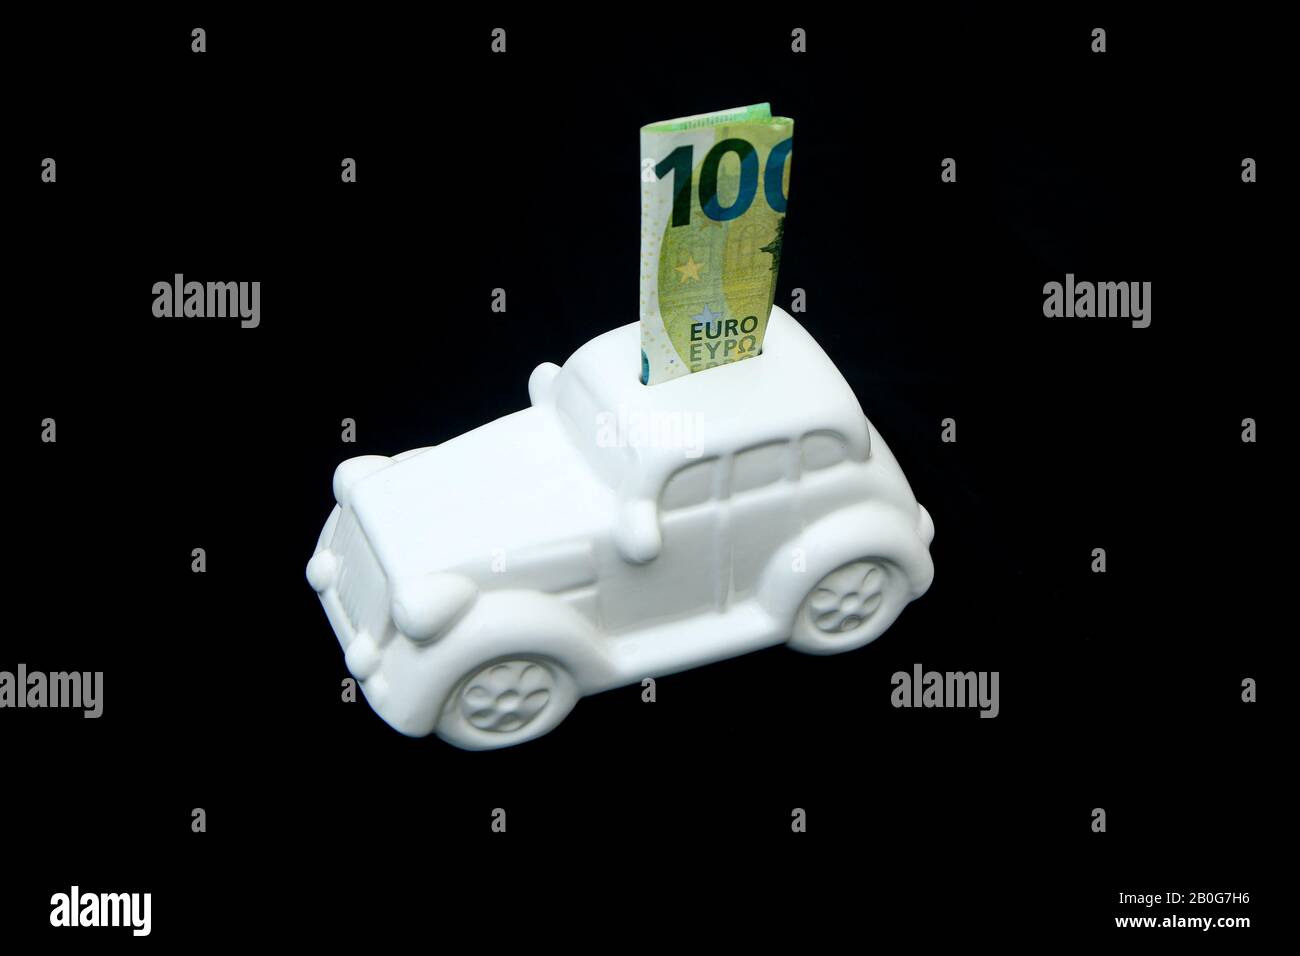 The ceramic car shaped money box with a banknote inside. It can be symbol for costs for car´s repairs, investment, savings or insurance. Stock Photo